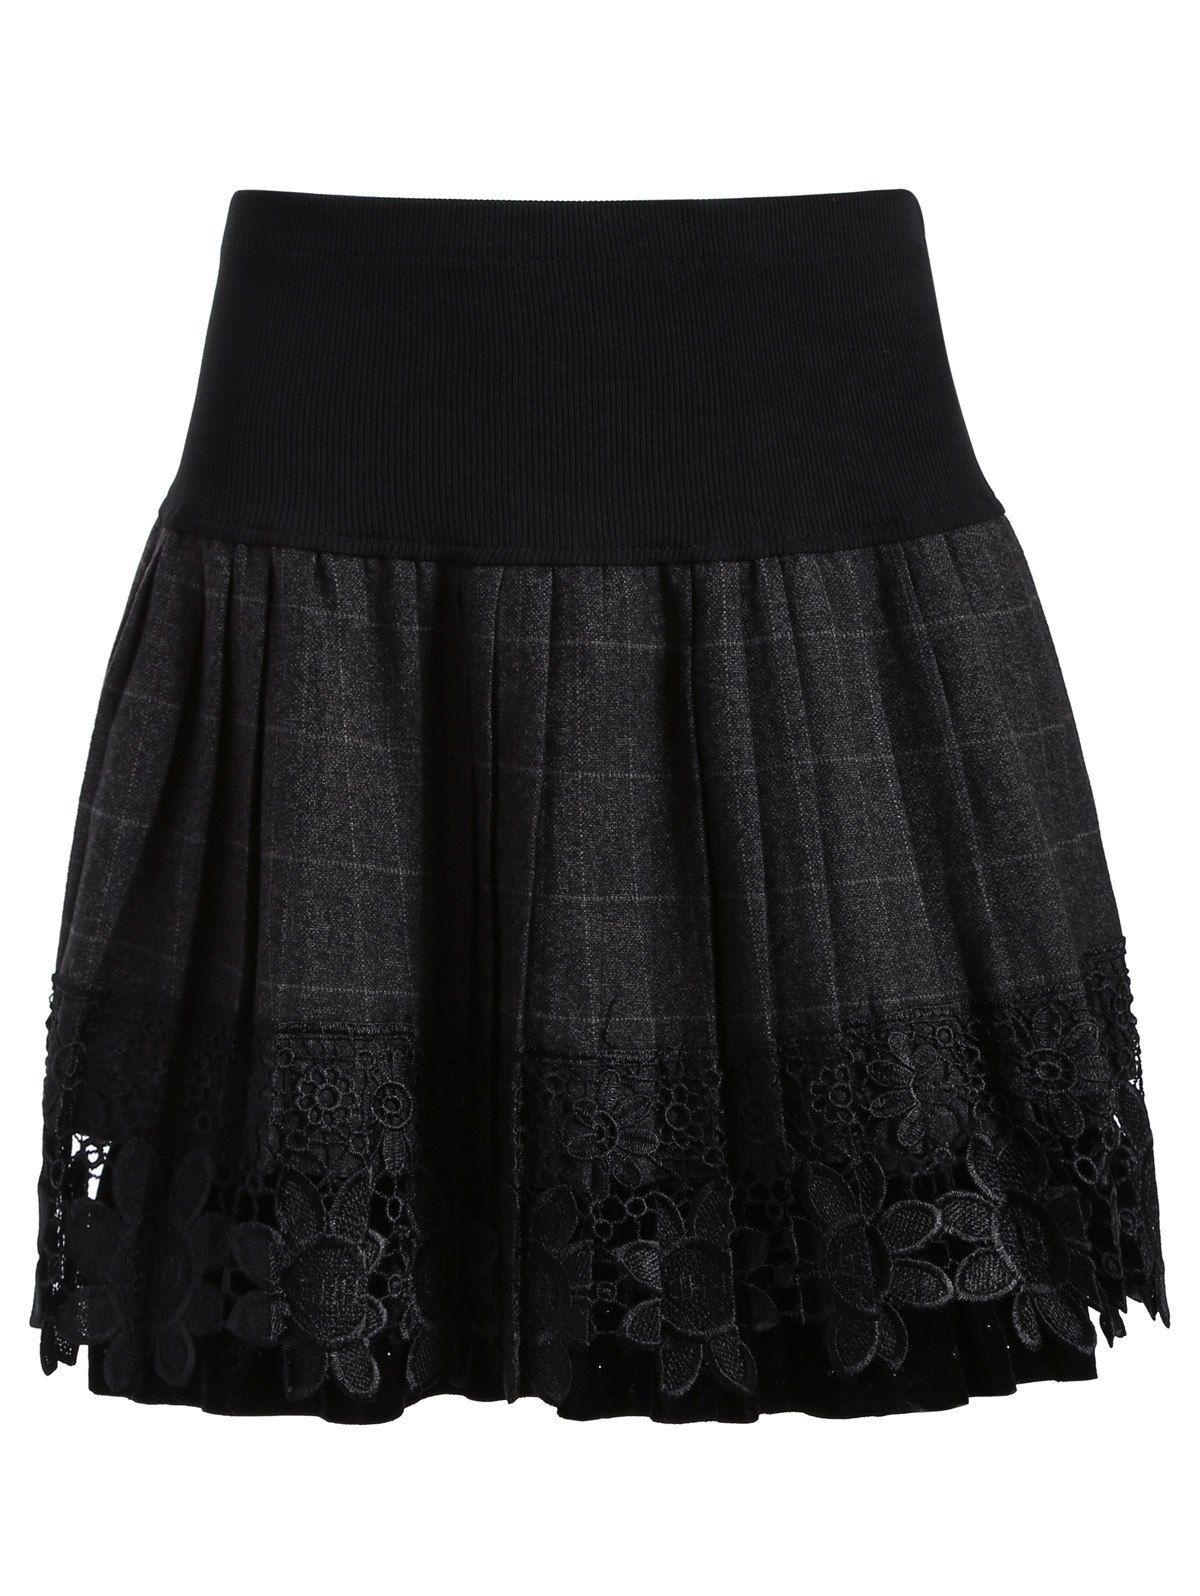 [17% OFF] 2021 Lace Insert Pleated Mini Skirt In DEEP GRAY | DressLily